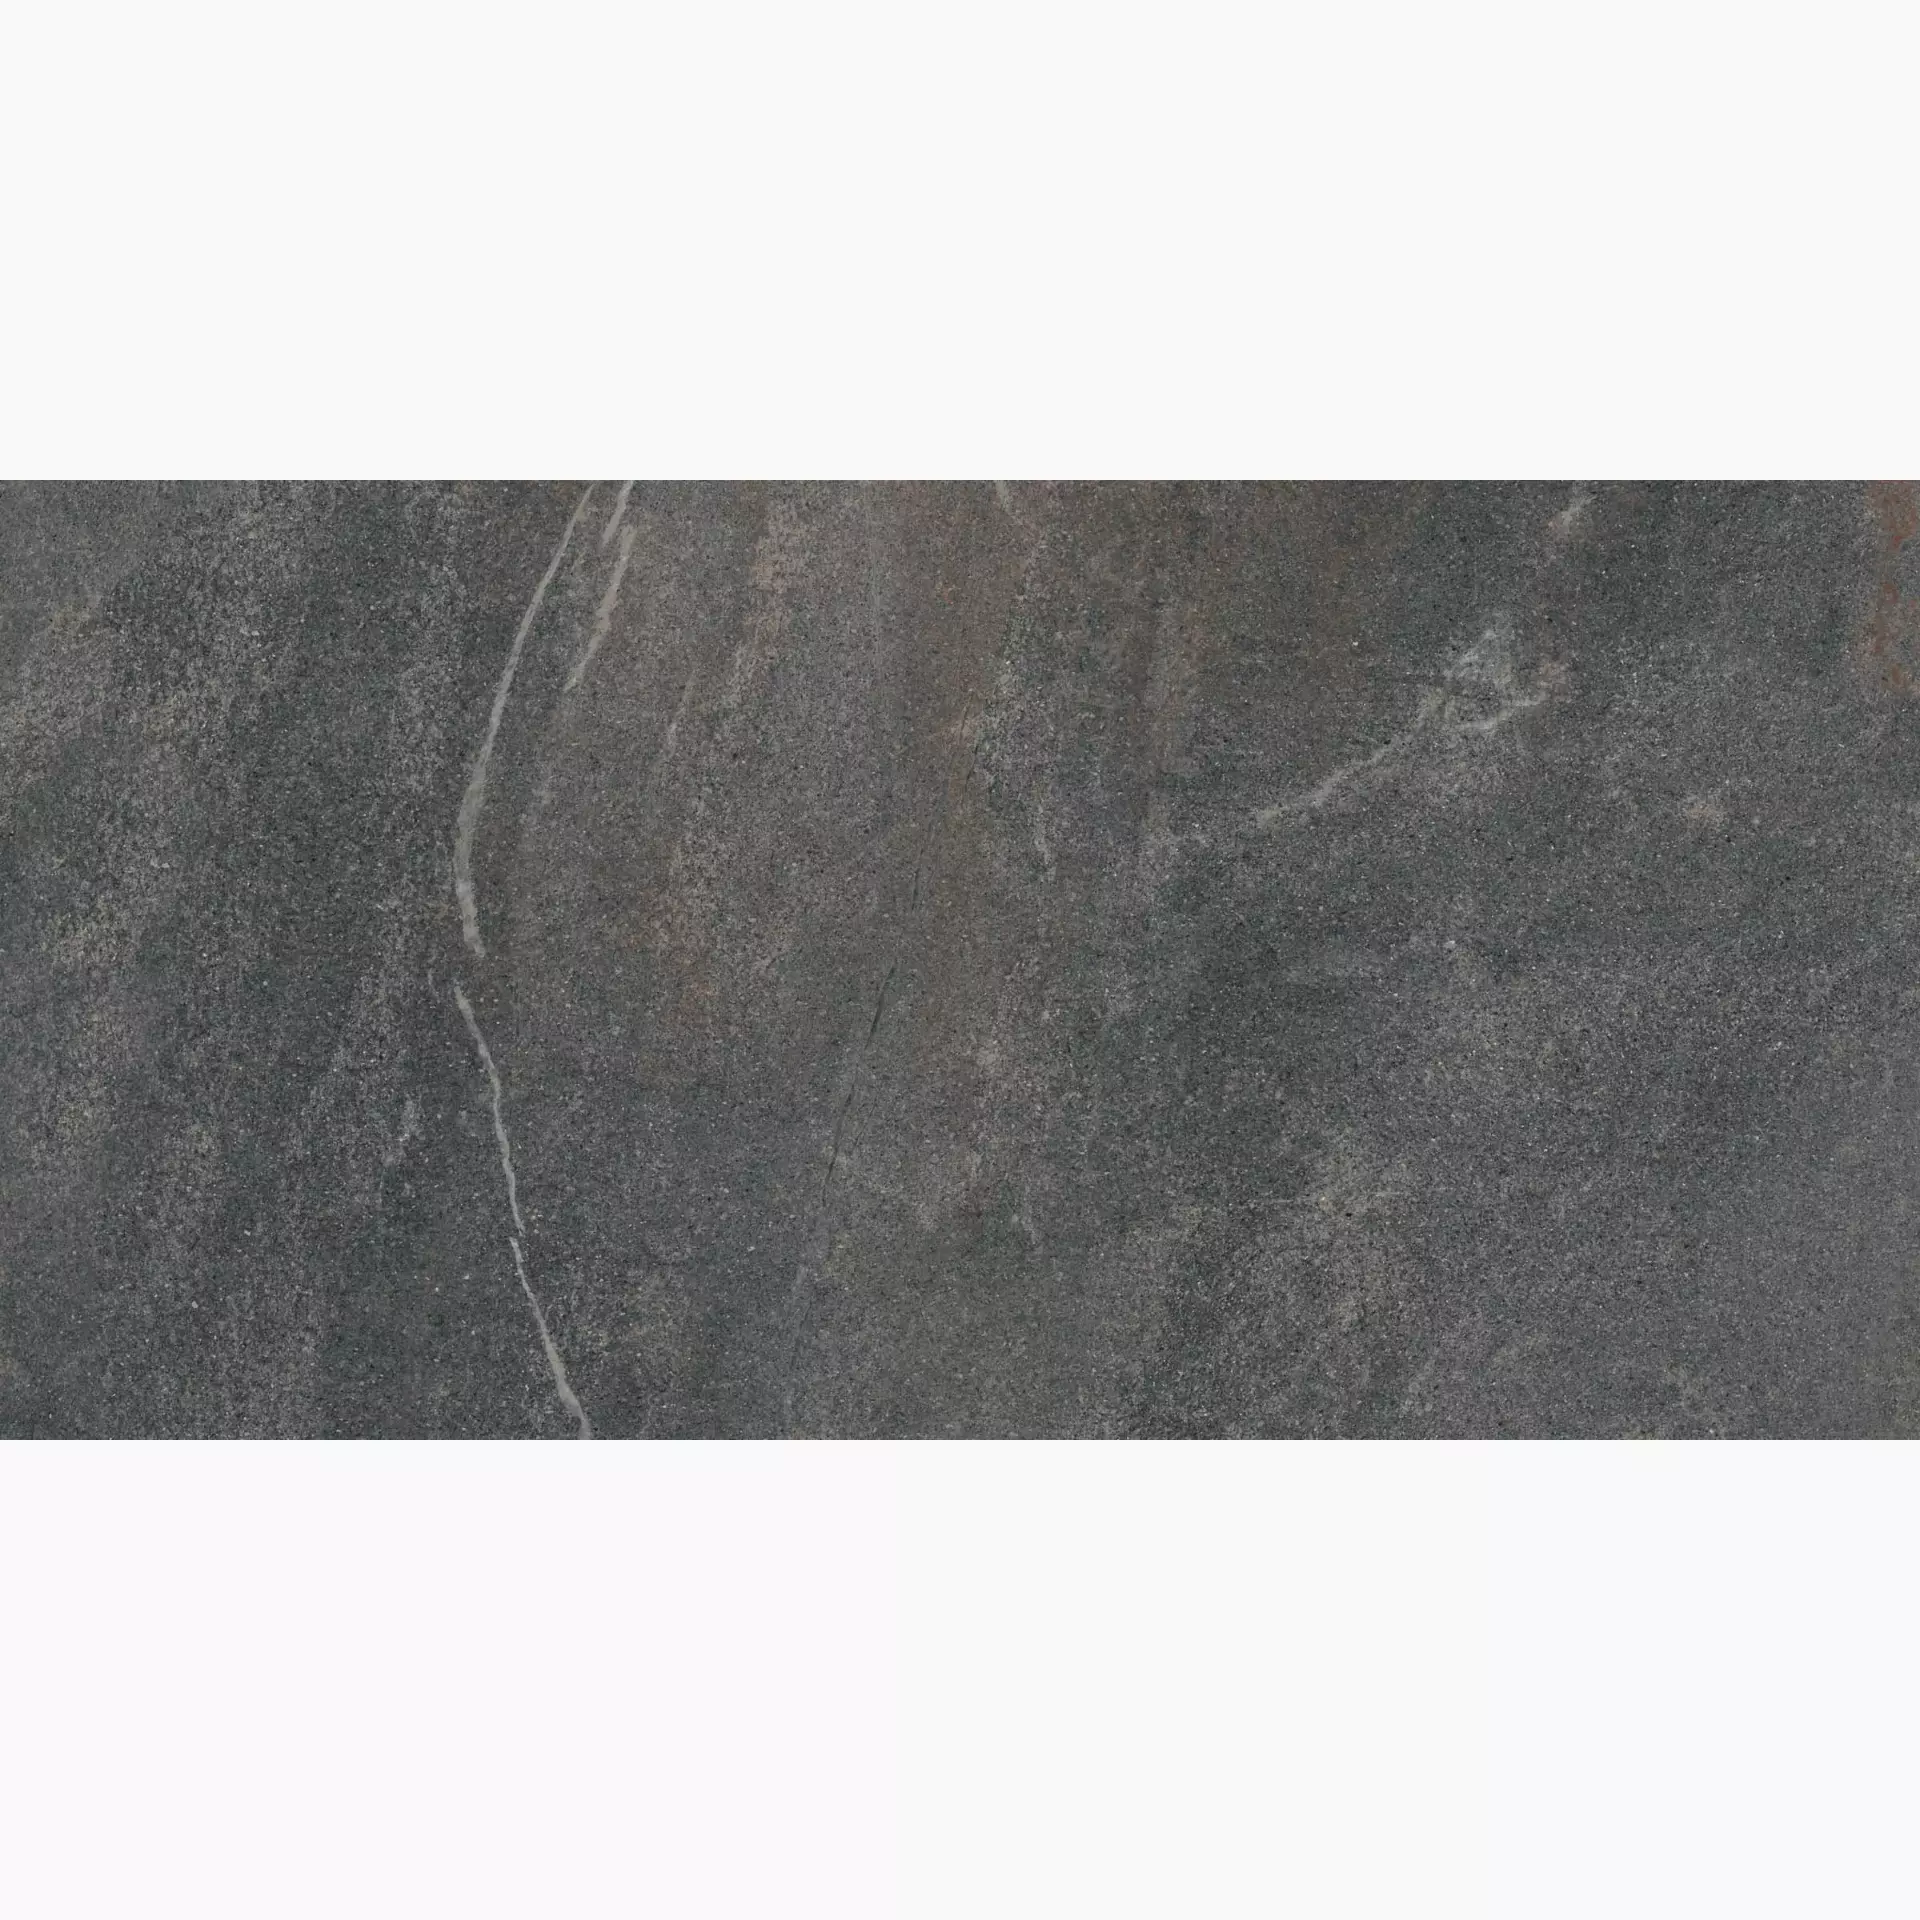 ABK Poetry Stone Piase Smoke Naturale PF60010183 60x120cm rectified 8,5mm